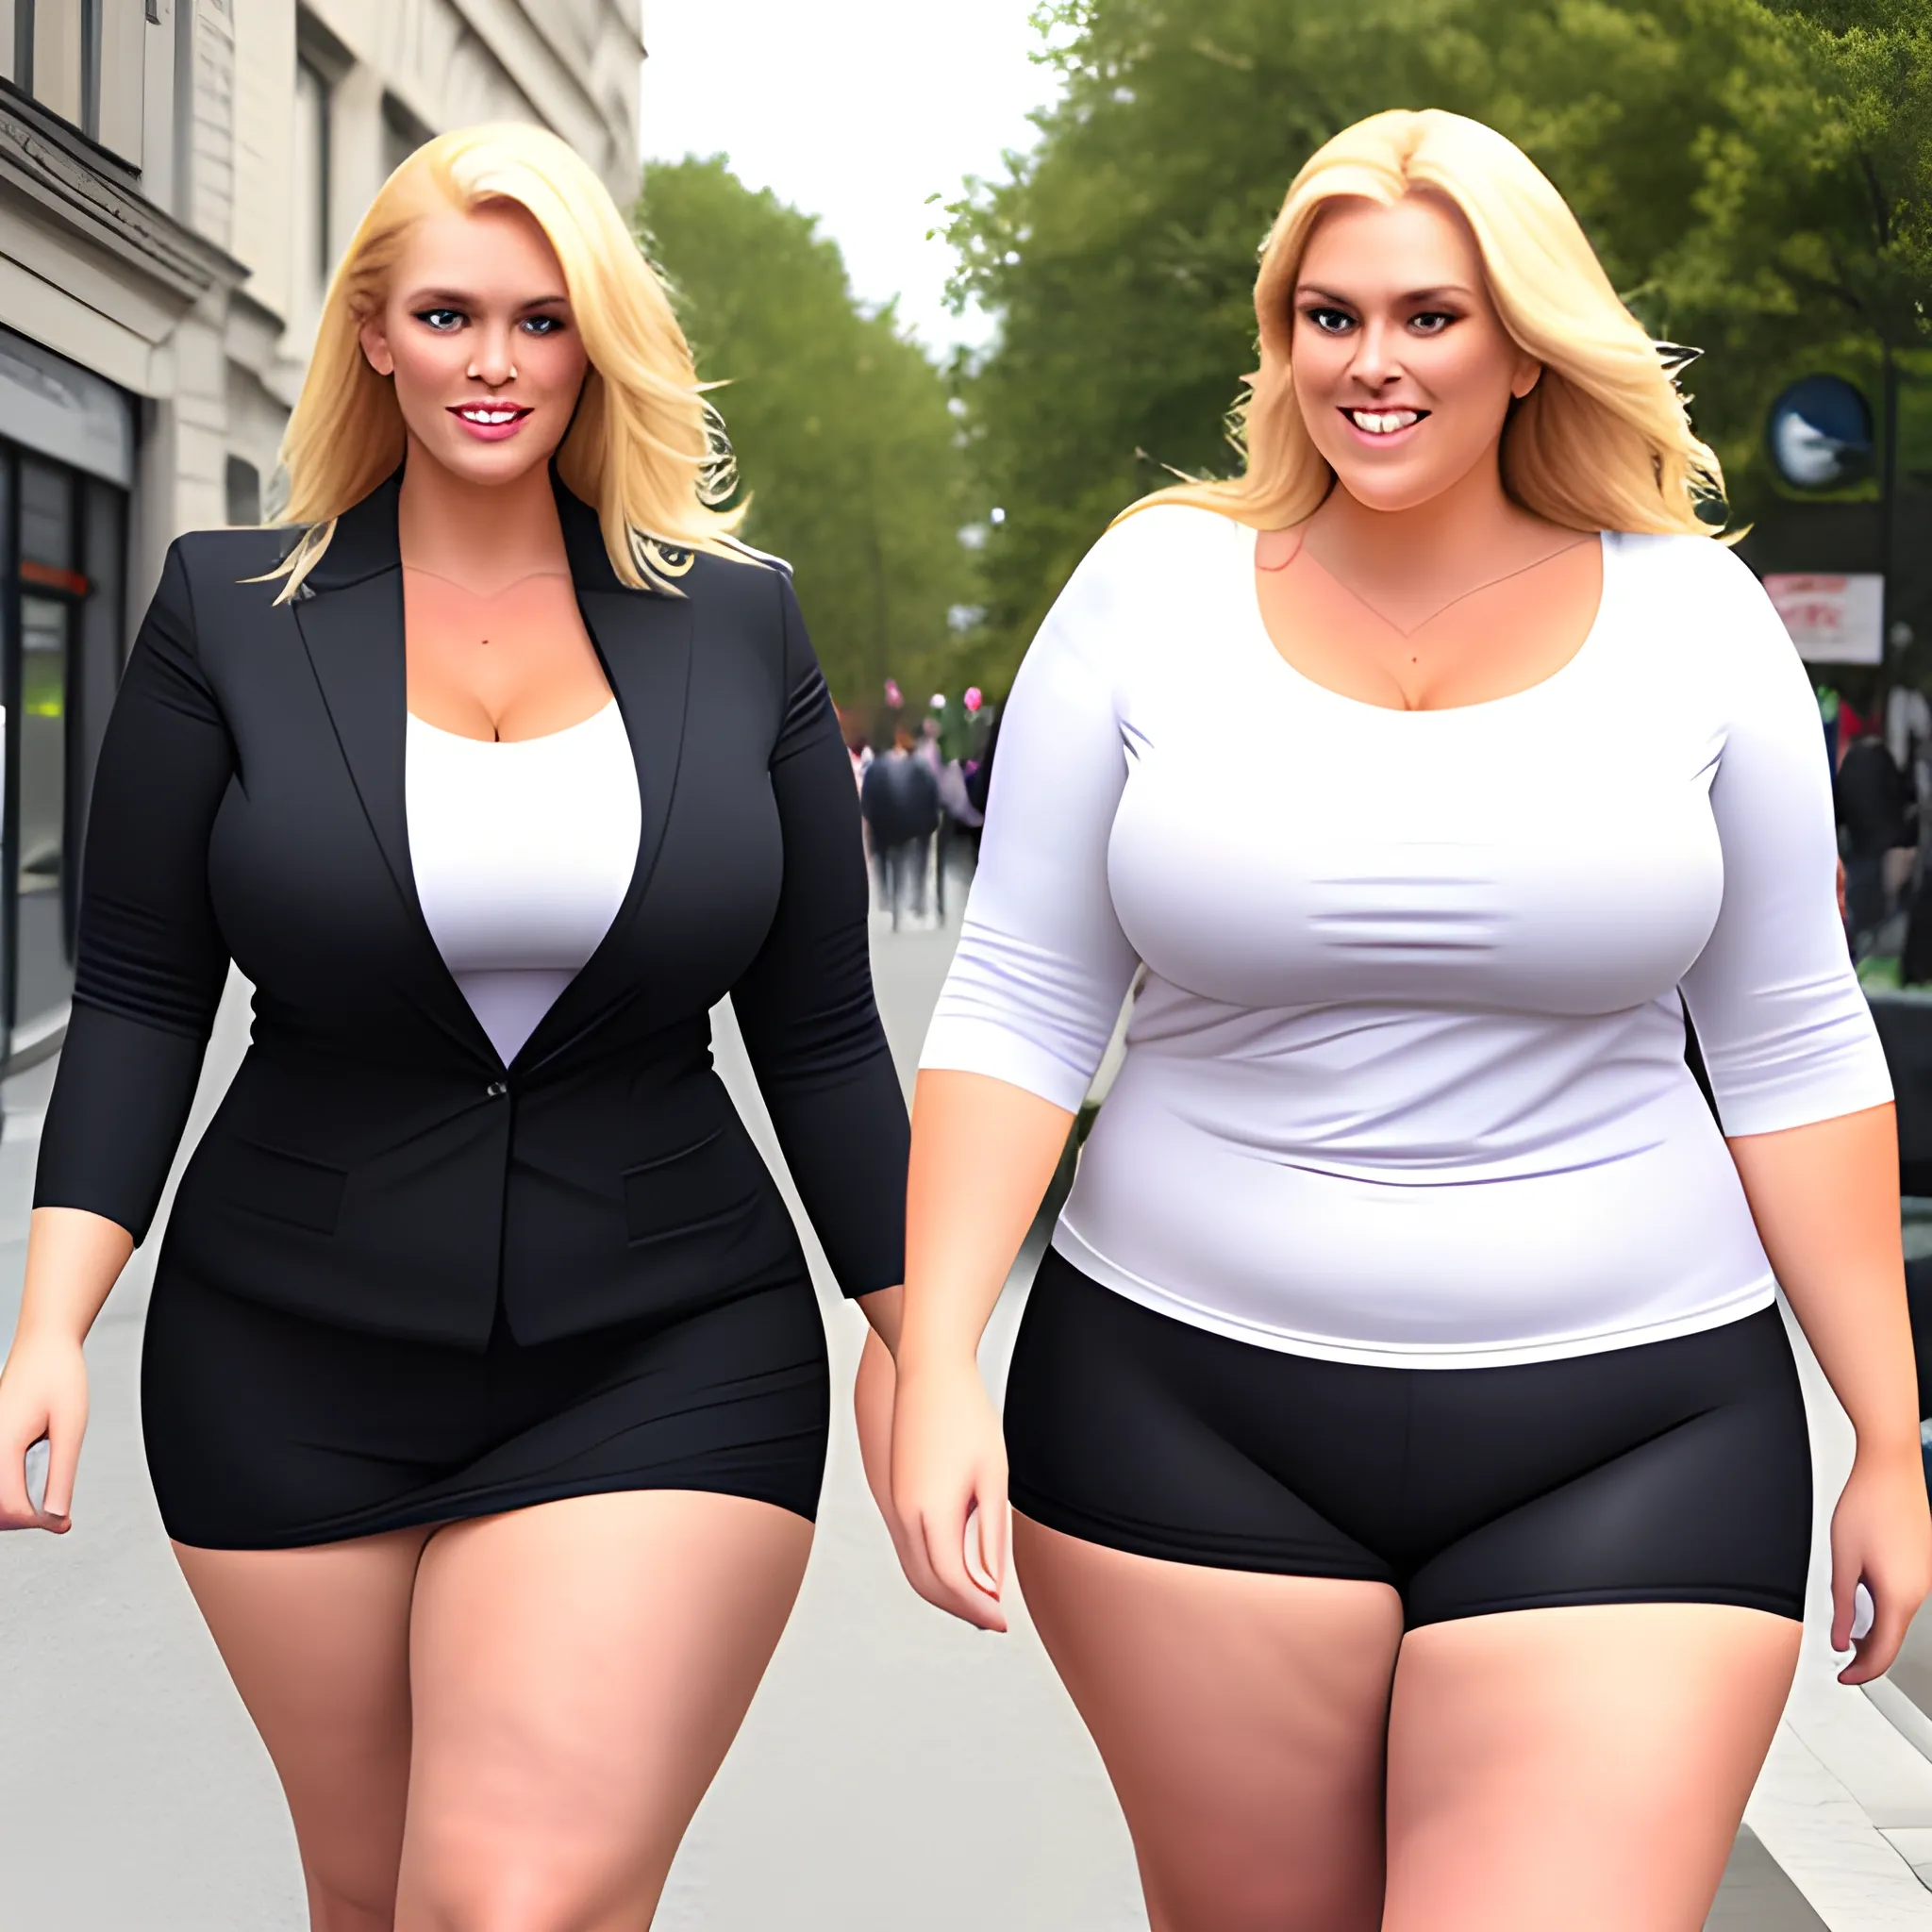 large and tall friendly blonde plus size girl with broad shoulde